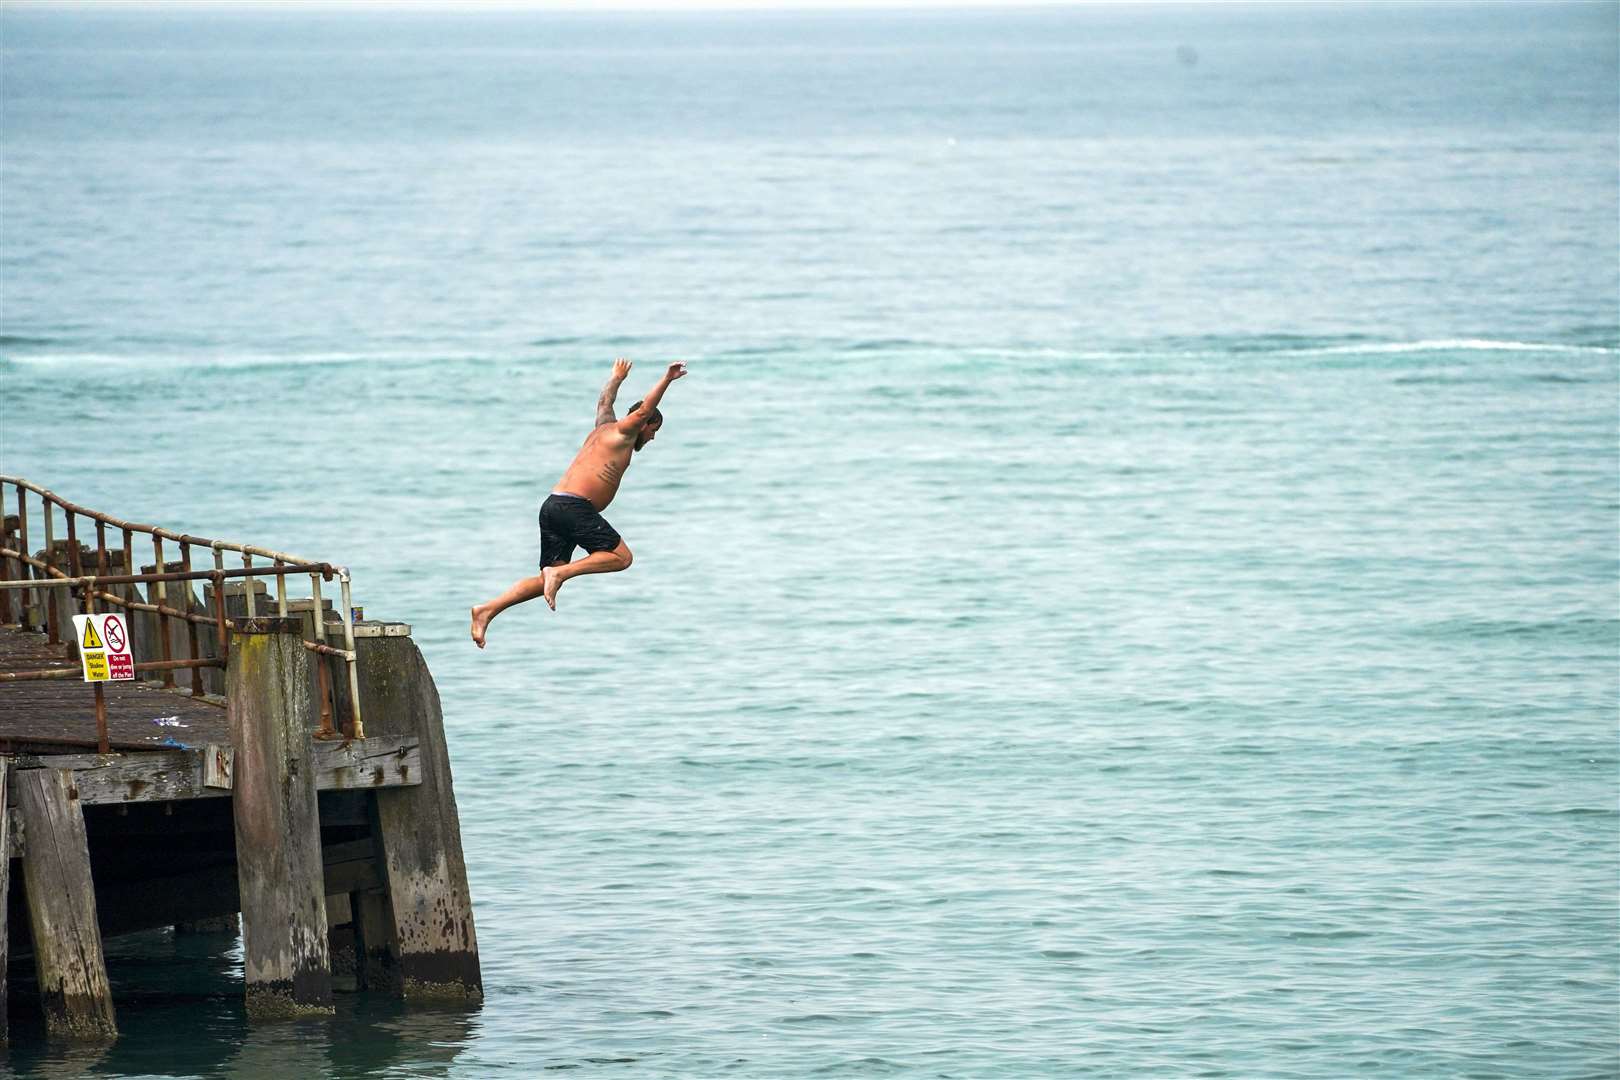 A man jumps from the pier in Bournemouth (Steve Parsons/PA)